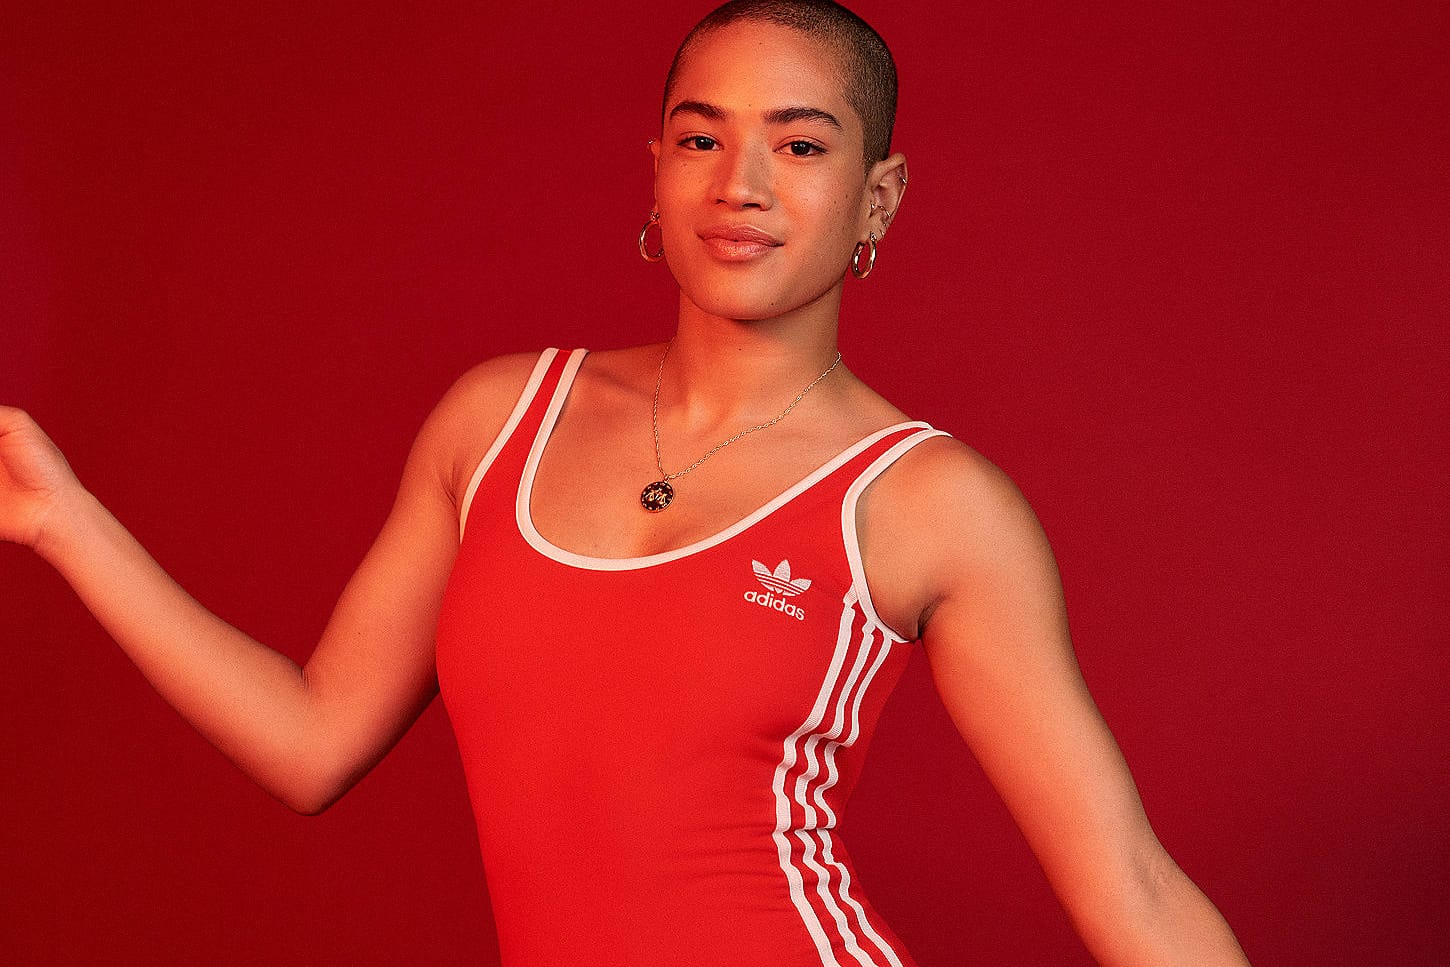 red adidas bodysuit outfit